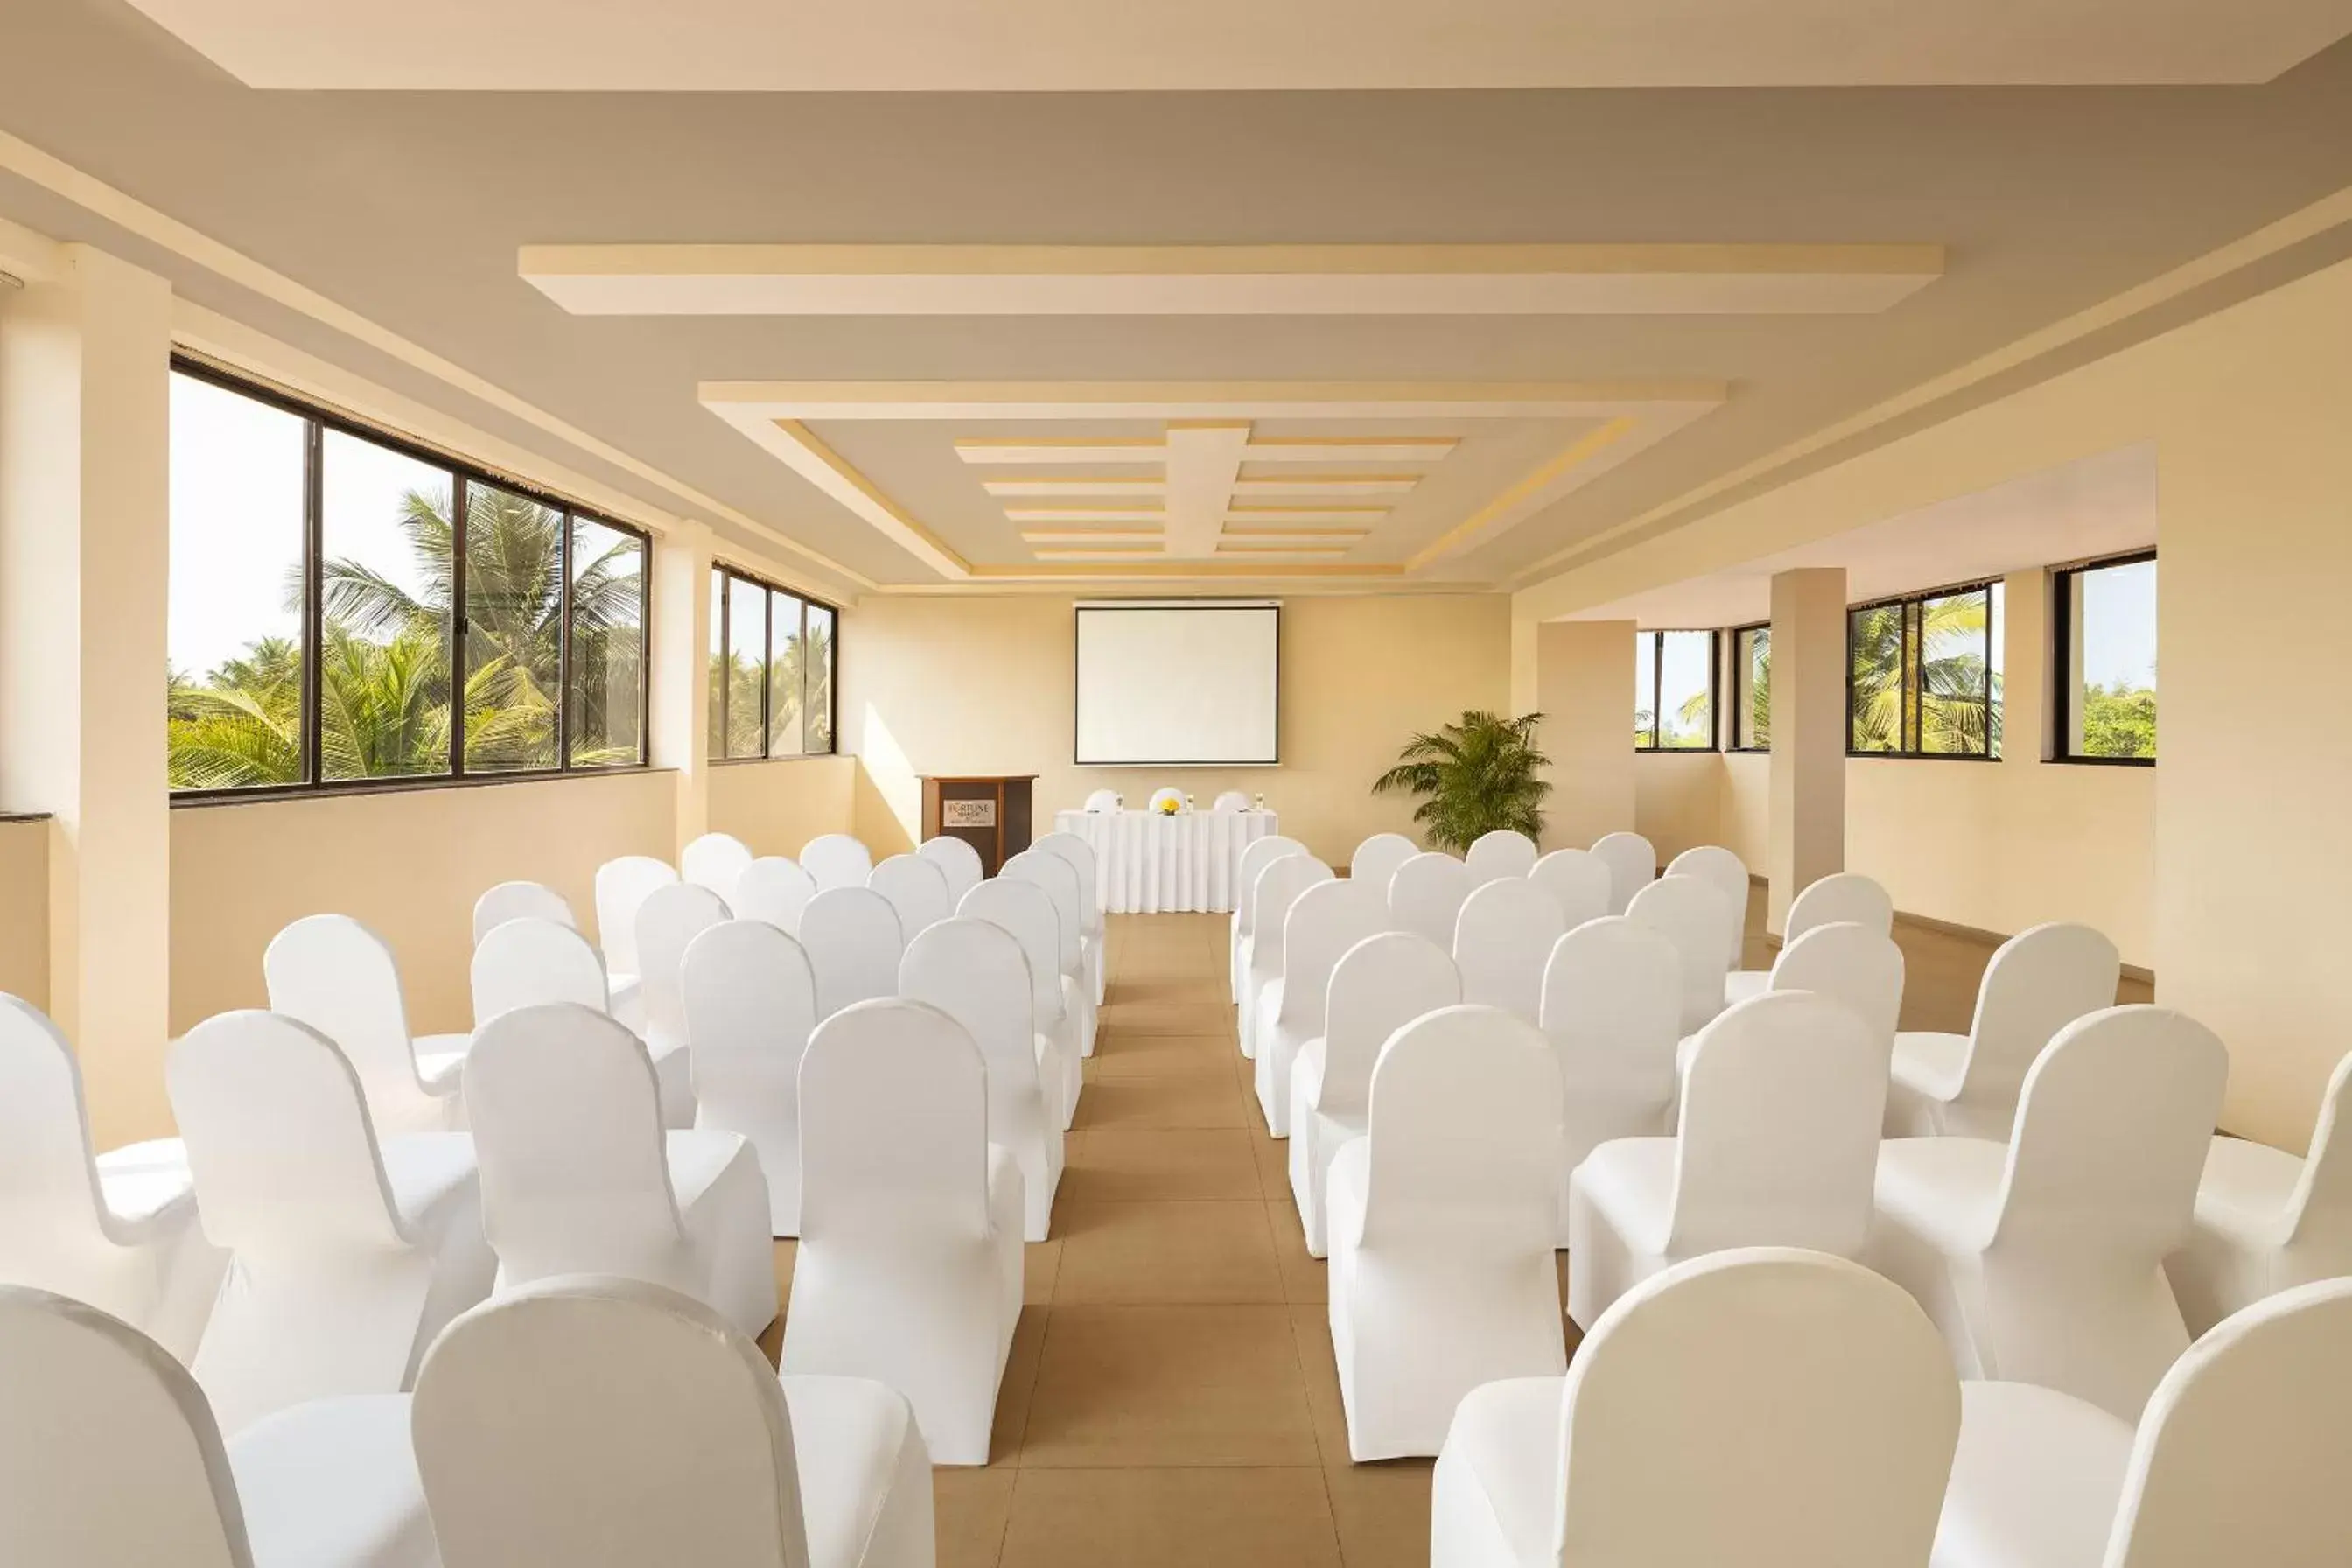 Banquet/Function facilities in Fortune Resort Benaulim, Goa - Member ITC's Hotel Group